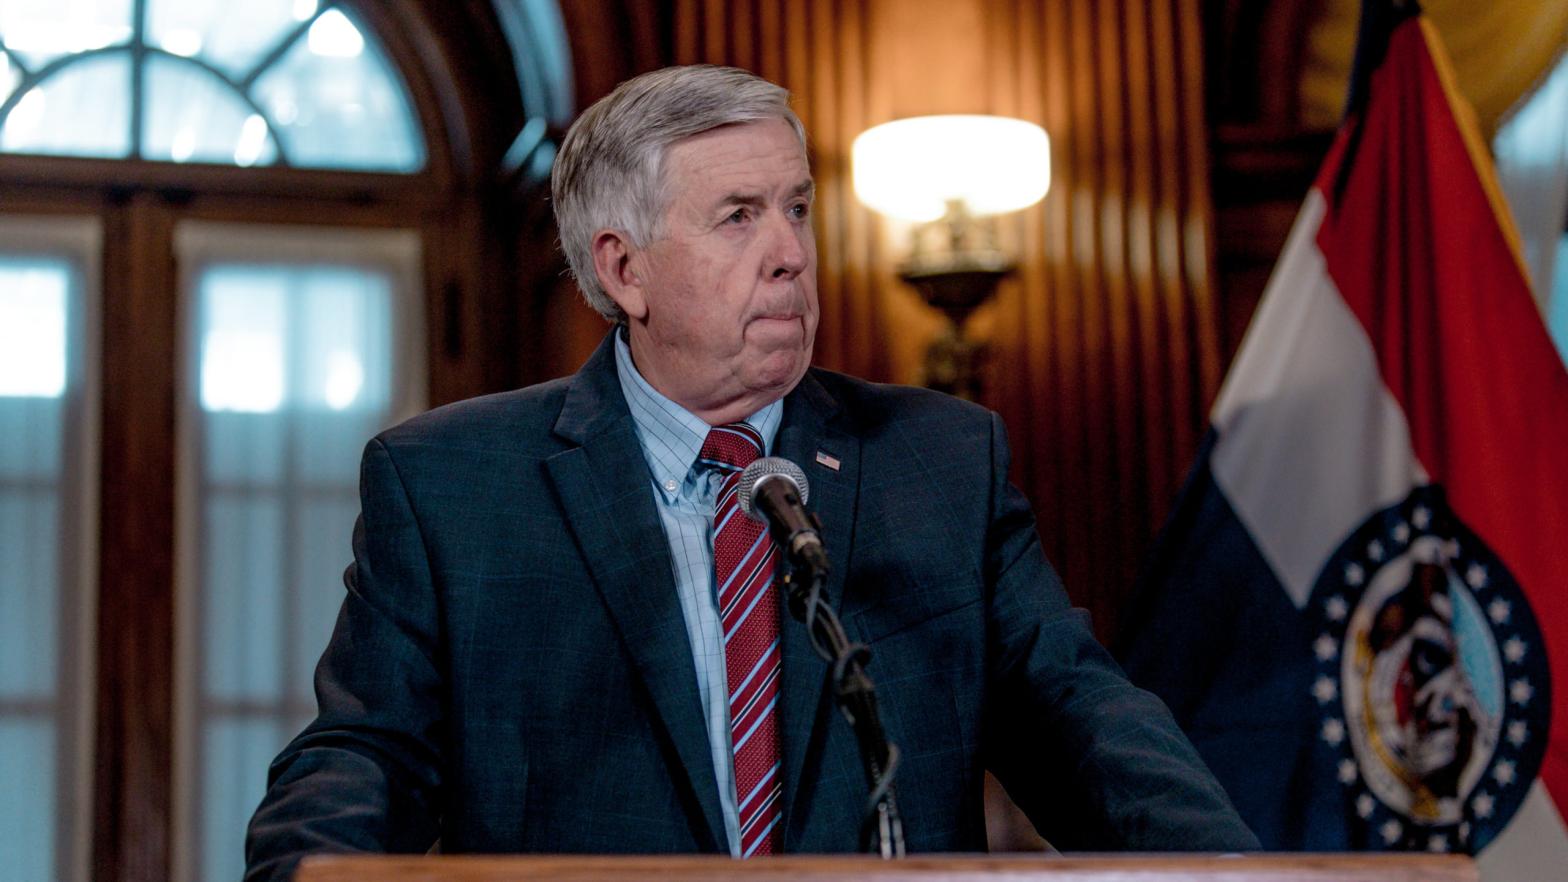 Gov. Mike Parson listens to a media question during a press conference to discuss the status of licence renewal for the St. Louis Planned Parenthood facility on May 29, 2019, in Jefferson City, Missouri. (Photo: Jacob Moscovitch, Getty Images)